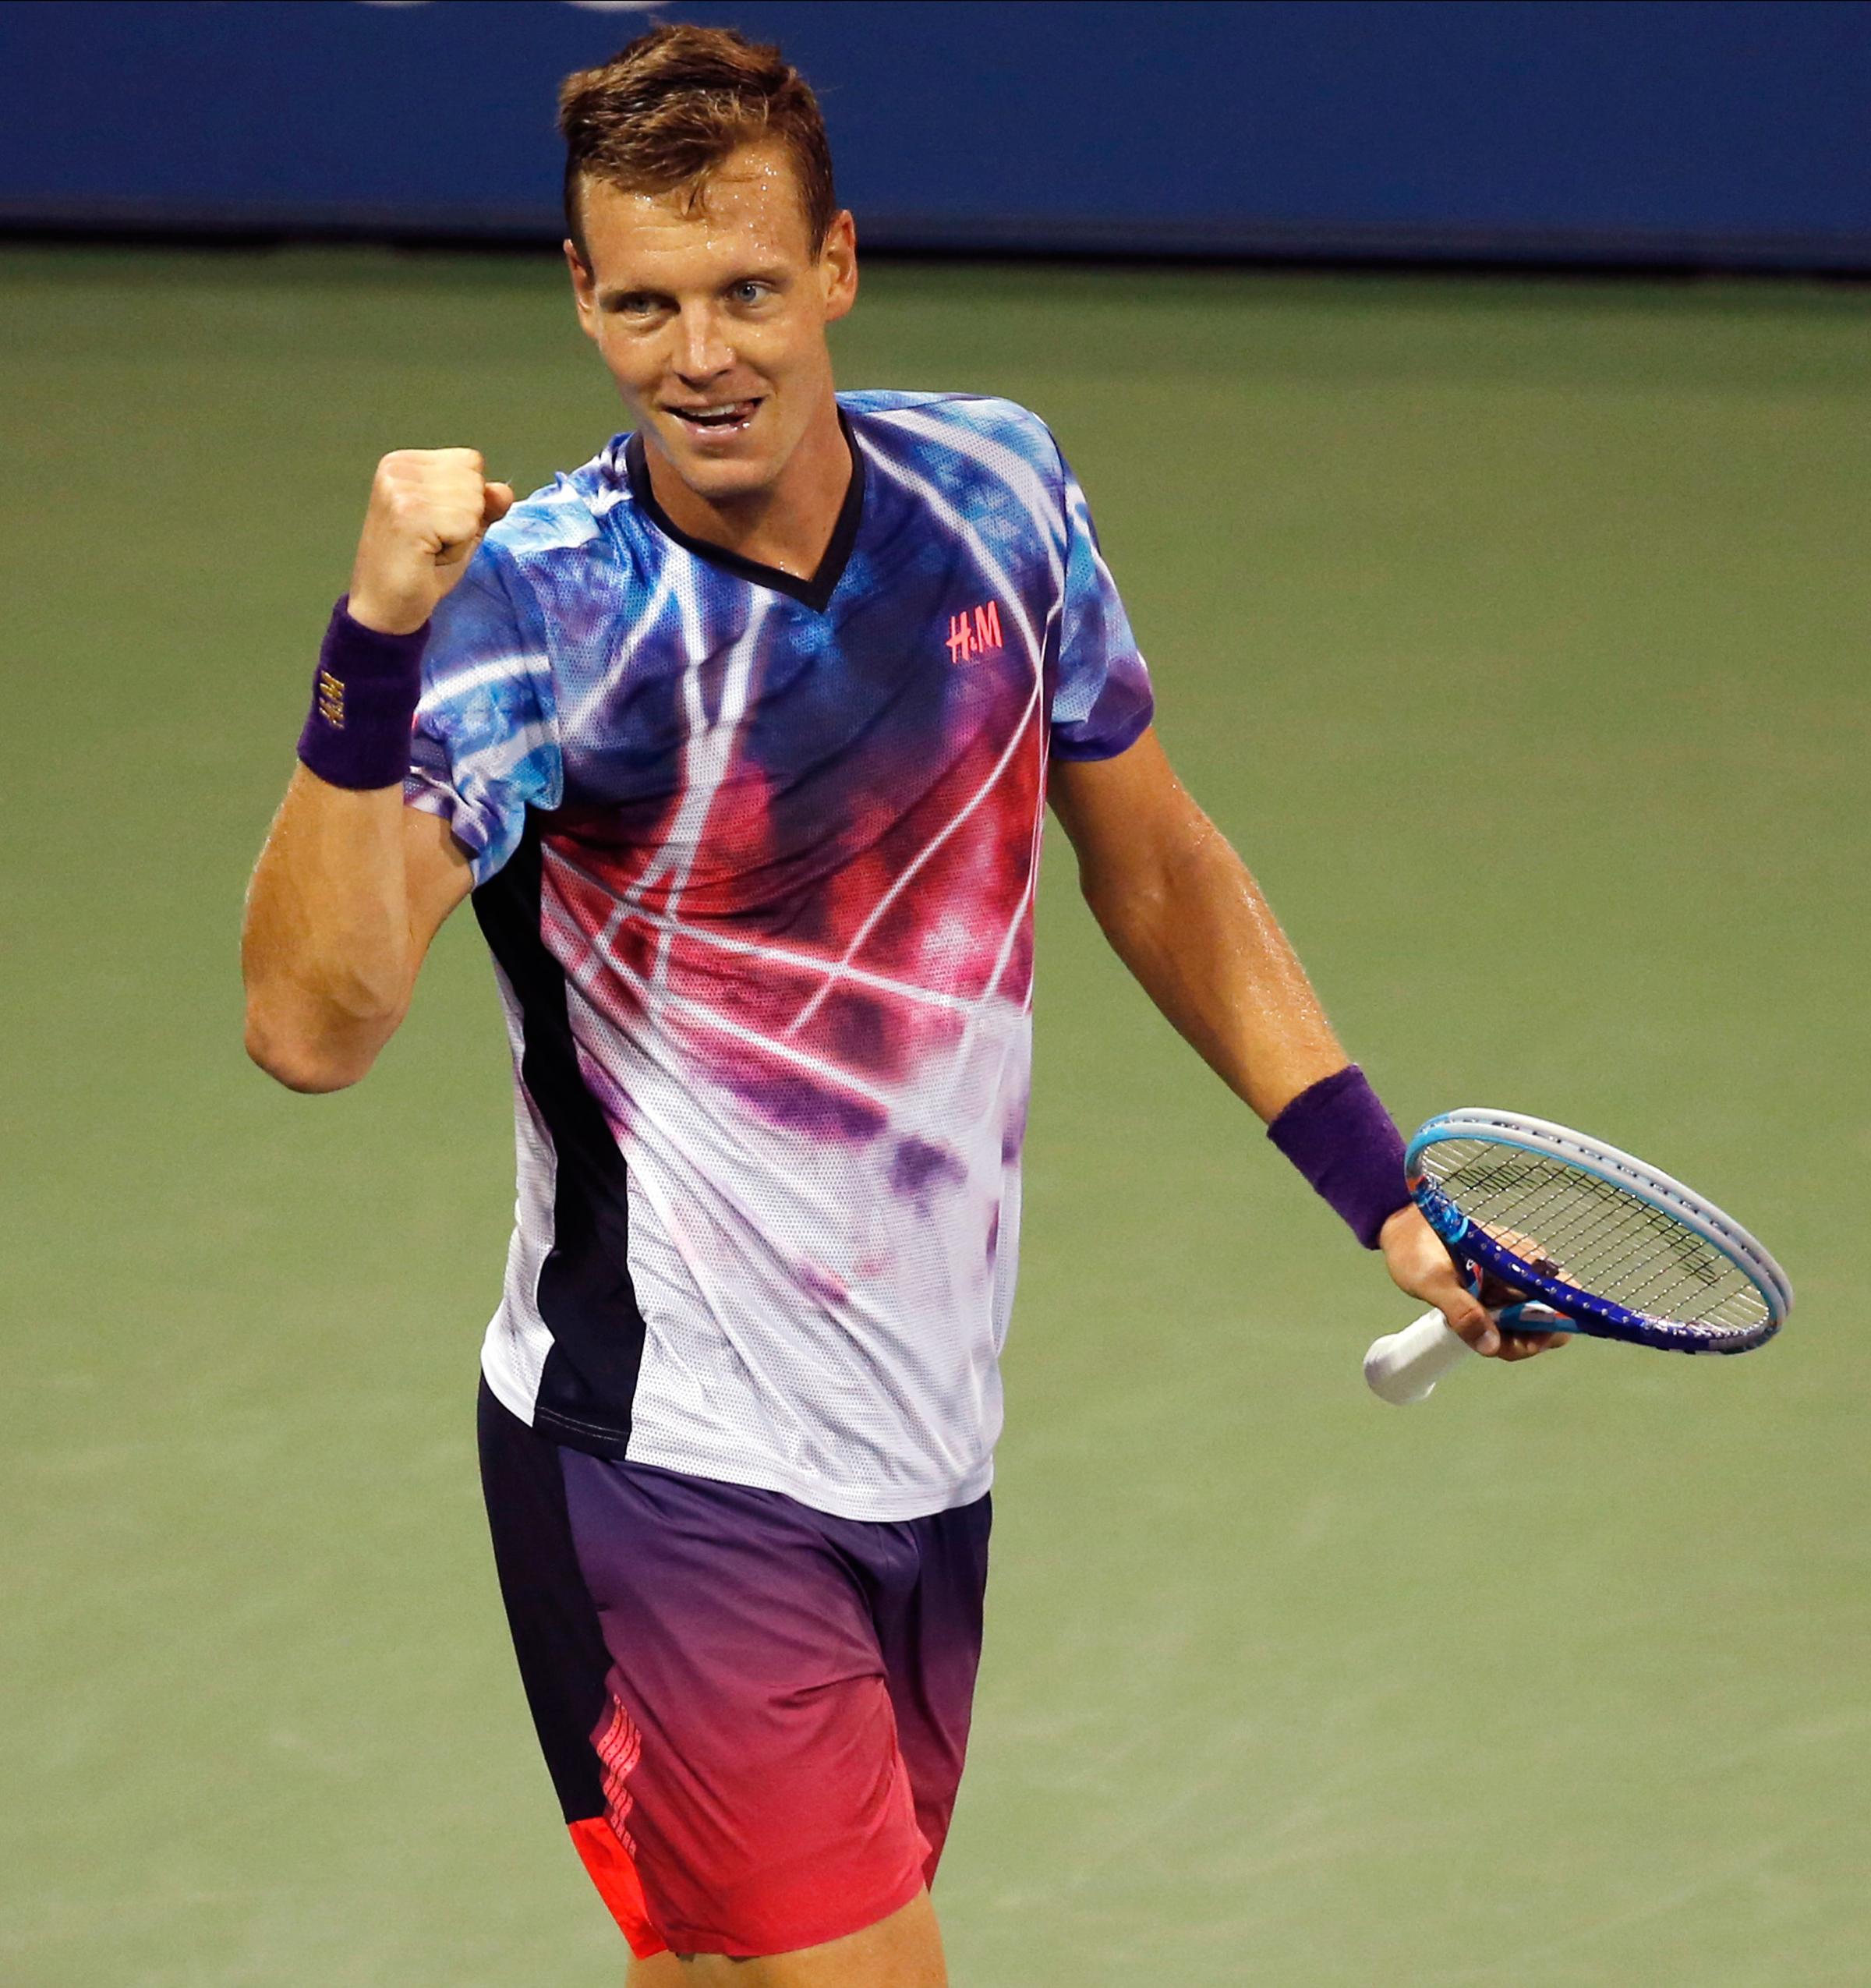 Tomas BerdTomas Berdych, of the Czech Republic, reacts after defeating Jurgen Melzer, of Austria, in the second round of the U.S. Open Tennis tournament in New York, Thursday, Sept. 3, 2015. (AP Photo/Kathy Willens)ych